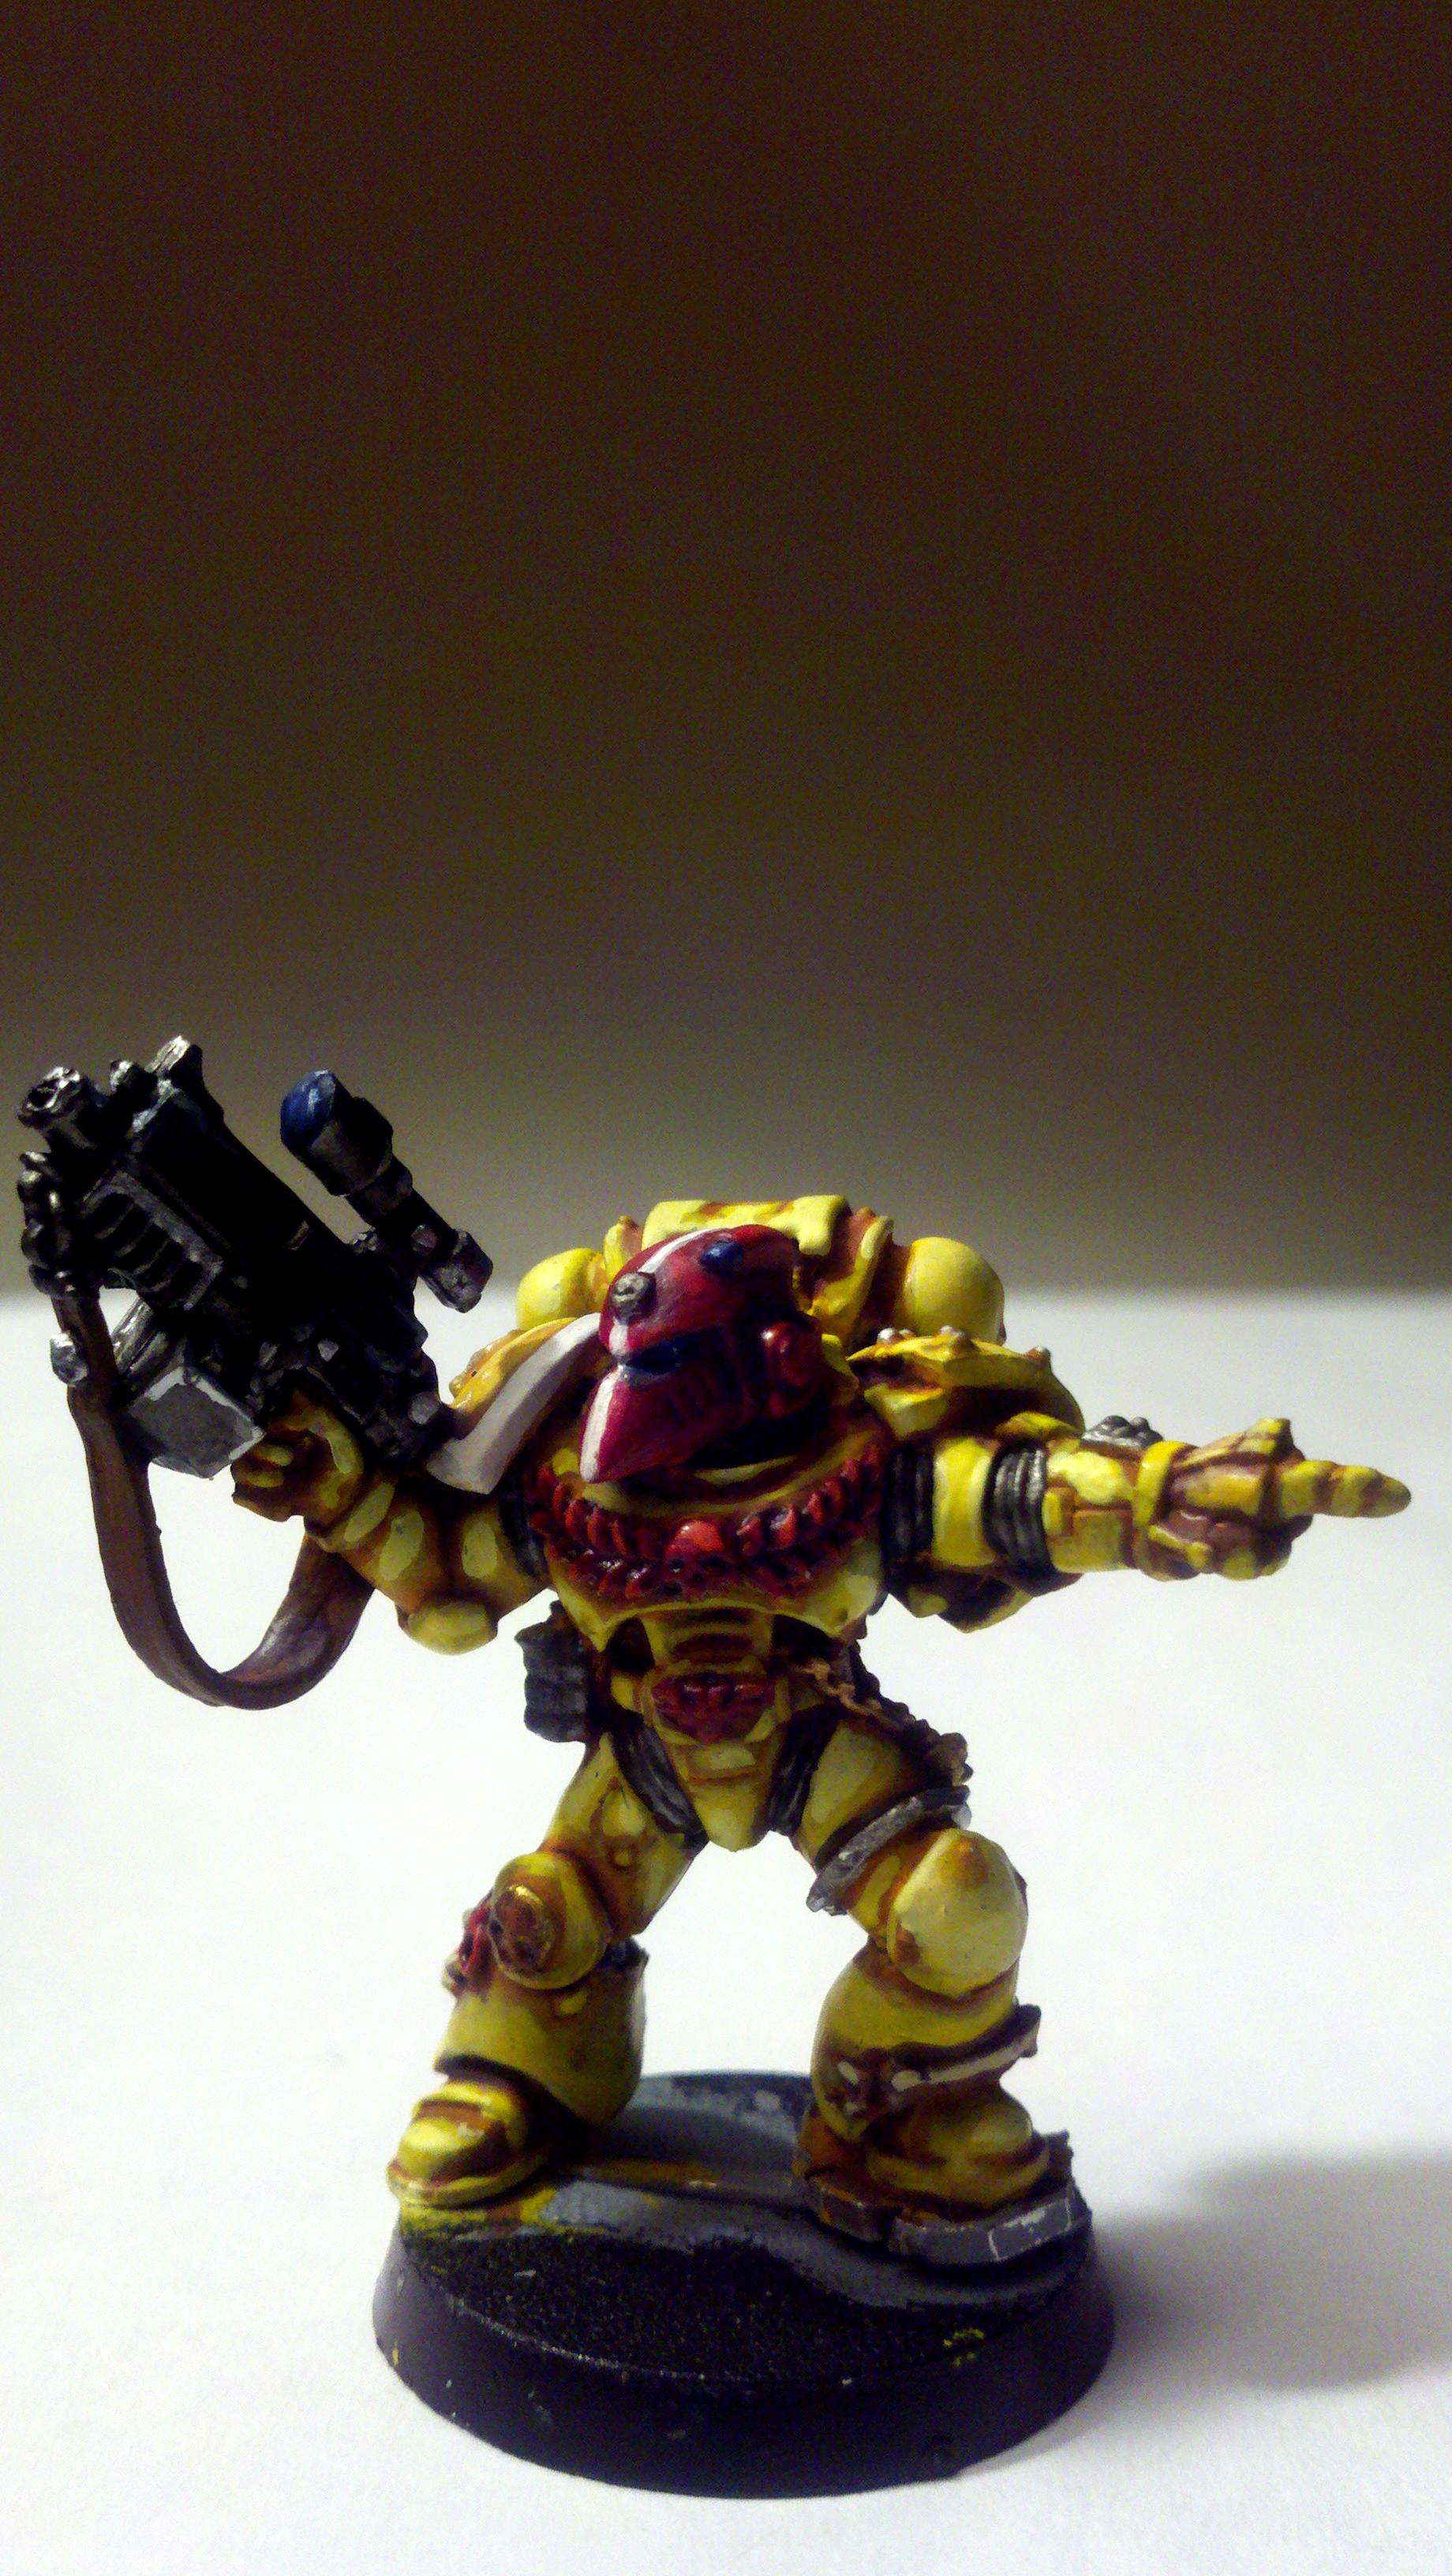 Imperial Fists, Space Marines, Warhammer 40,000